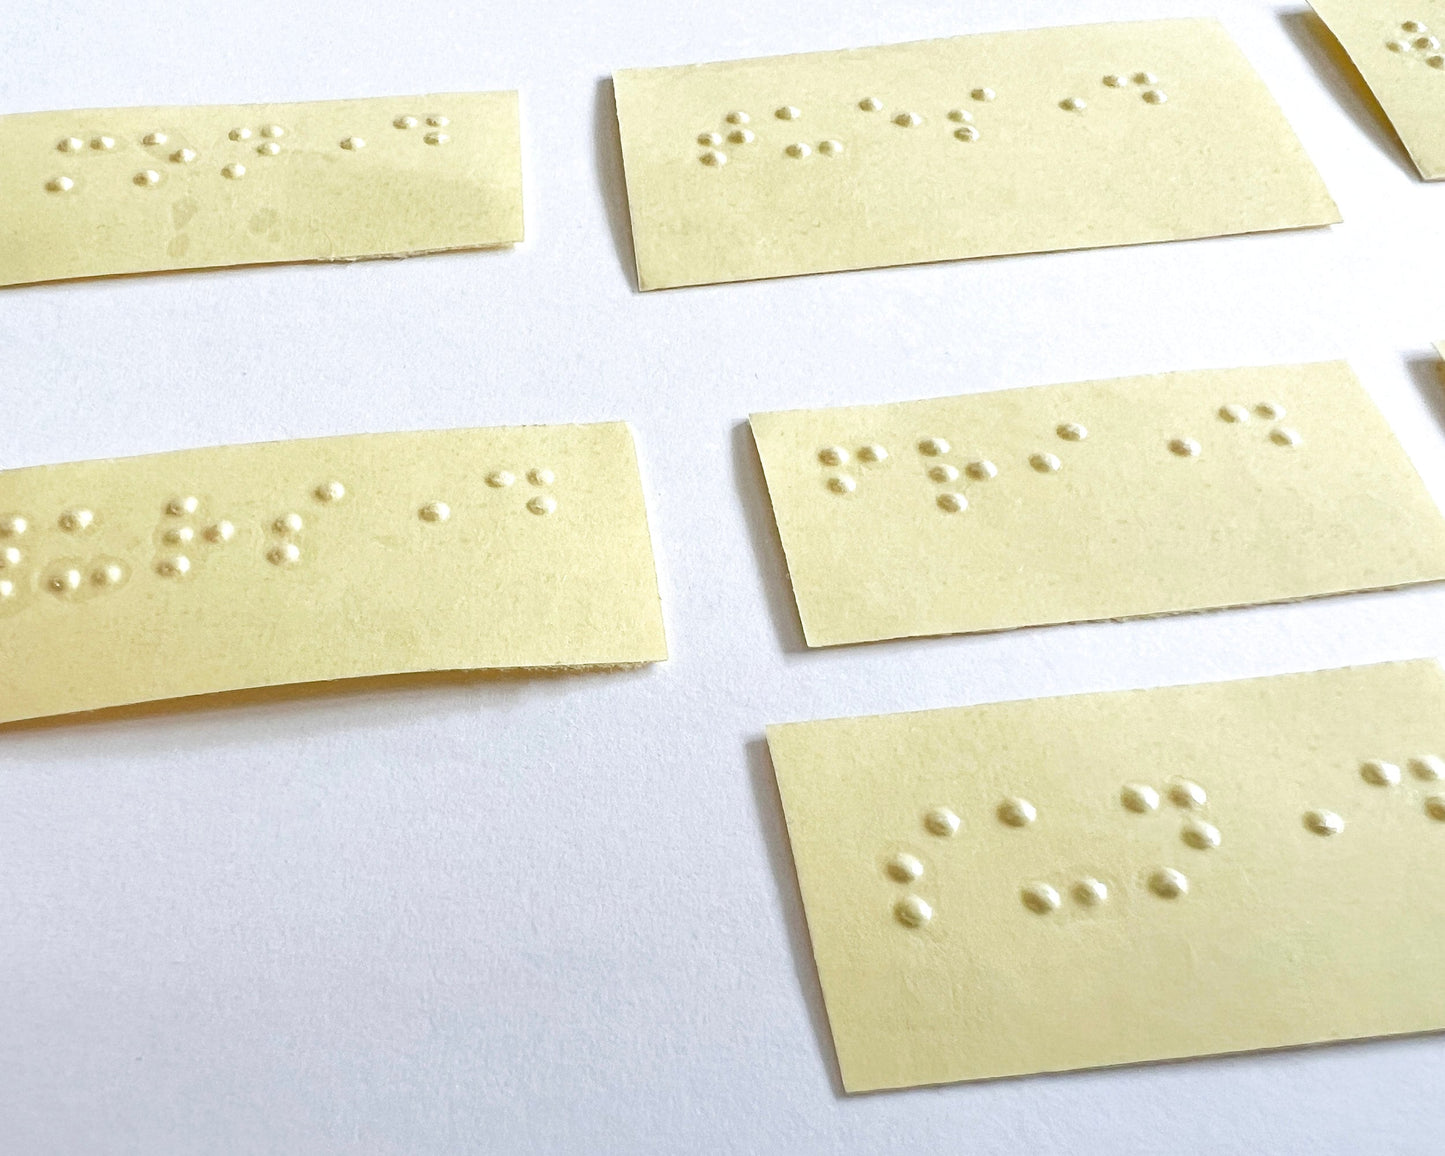 A close up of some of the days of the week braille labels. Labels are on a yellow backing paper and the labels themselves are clear.